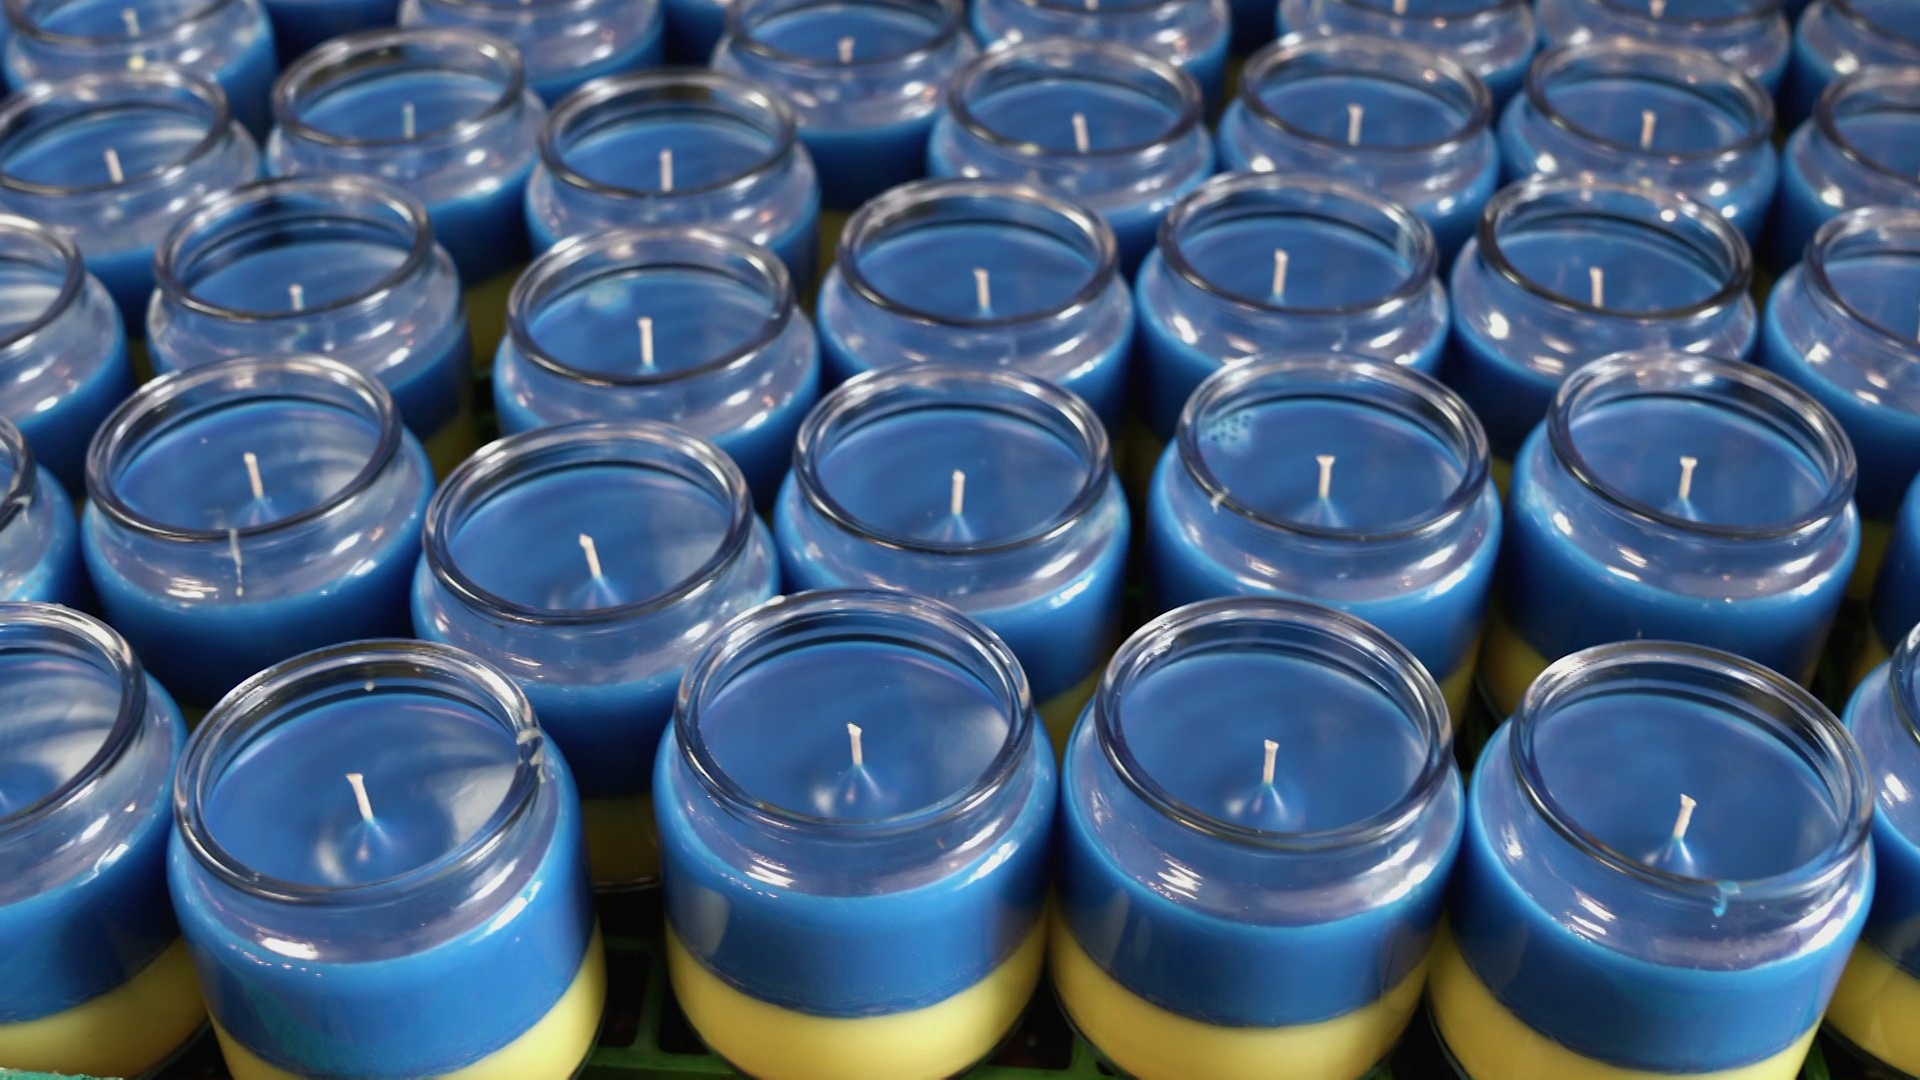 Having raised $700K, Wisconsin candle producer eyes $1M goal for Ukraine relief